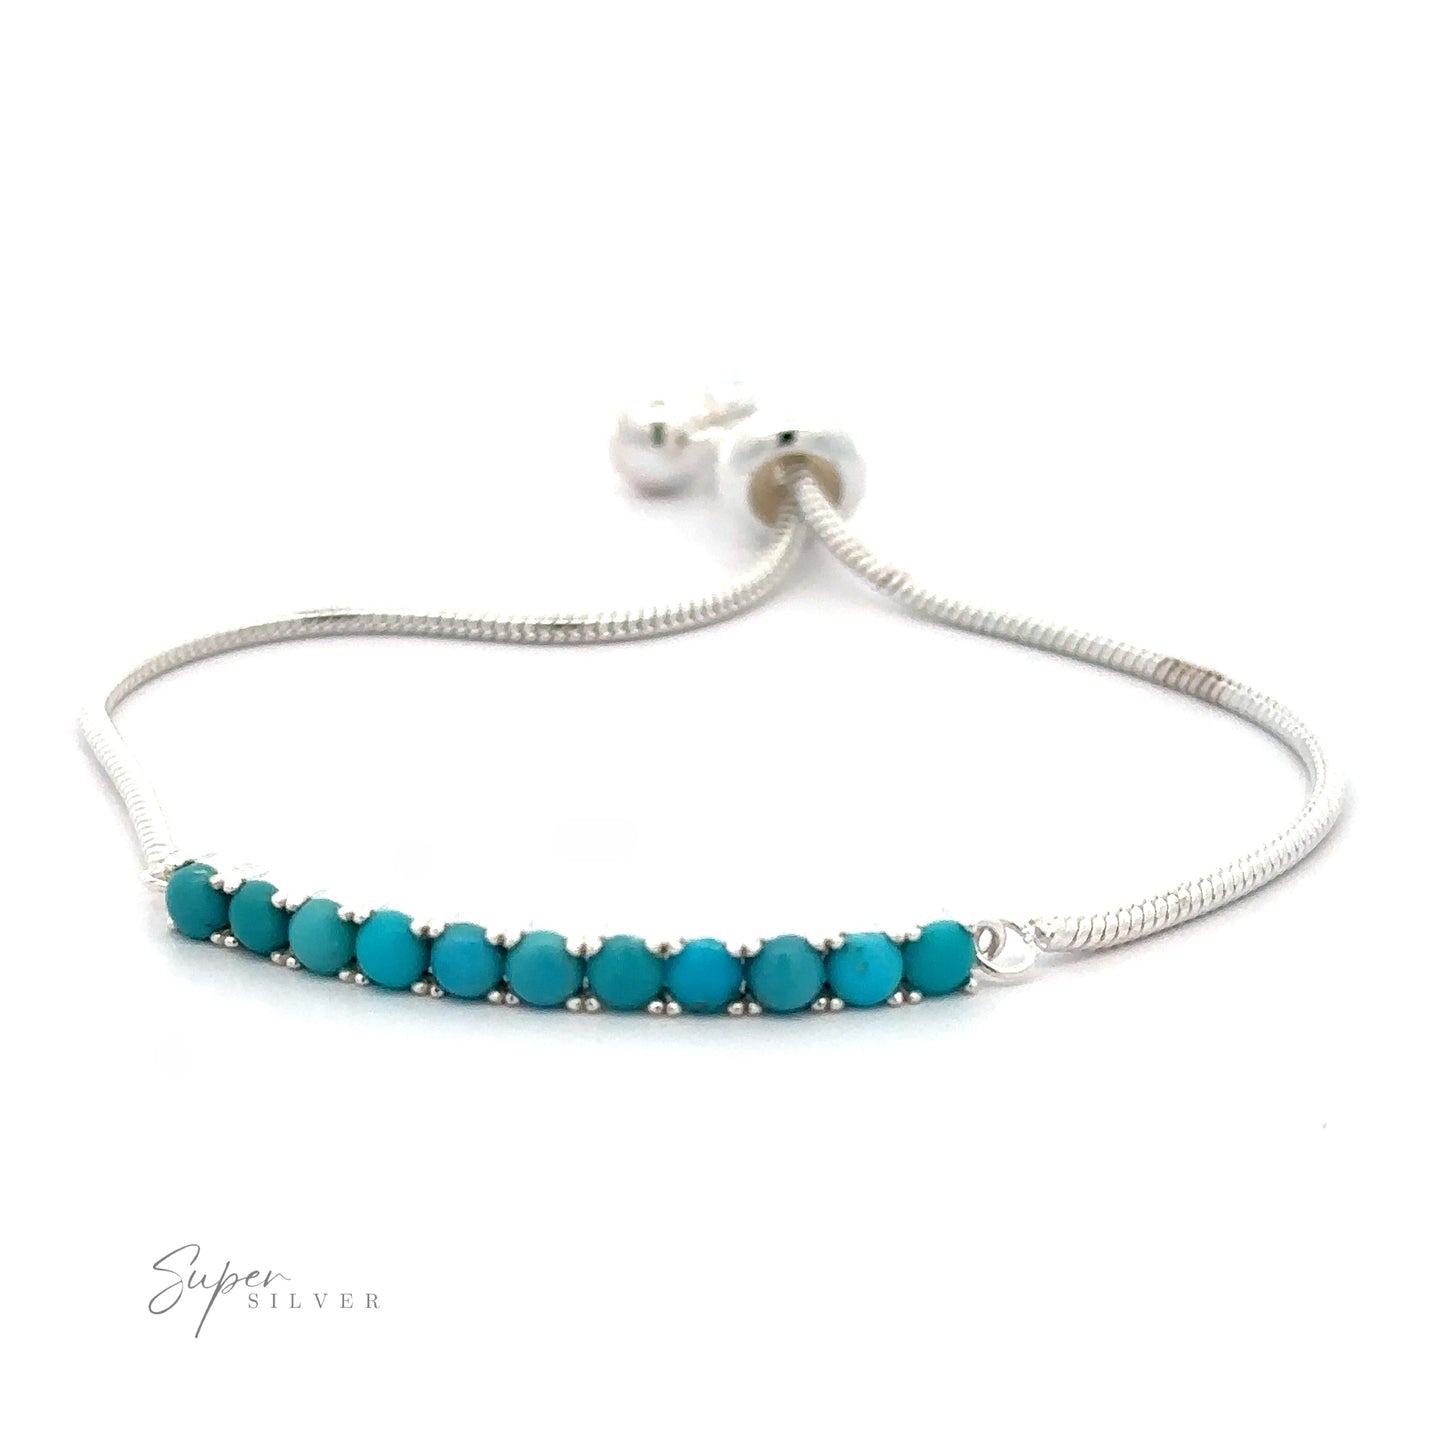 A Silver Adjustable Bracelet with American Turquoise features an adjustable snake chain design adorned with a row of nine small American turquoise beads. The clasp is visible in the background.